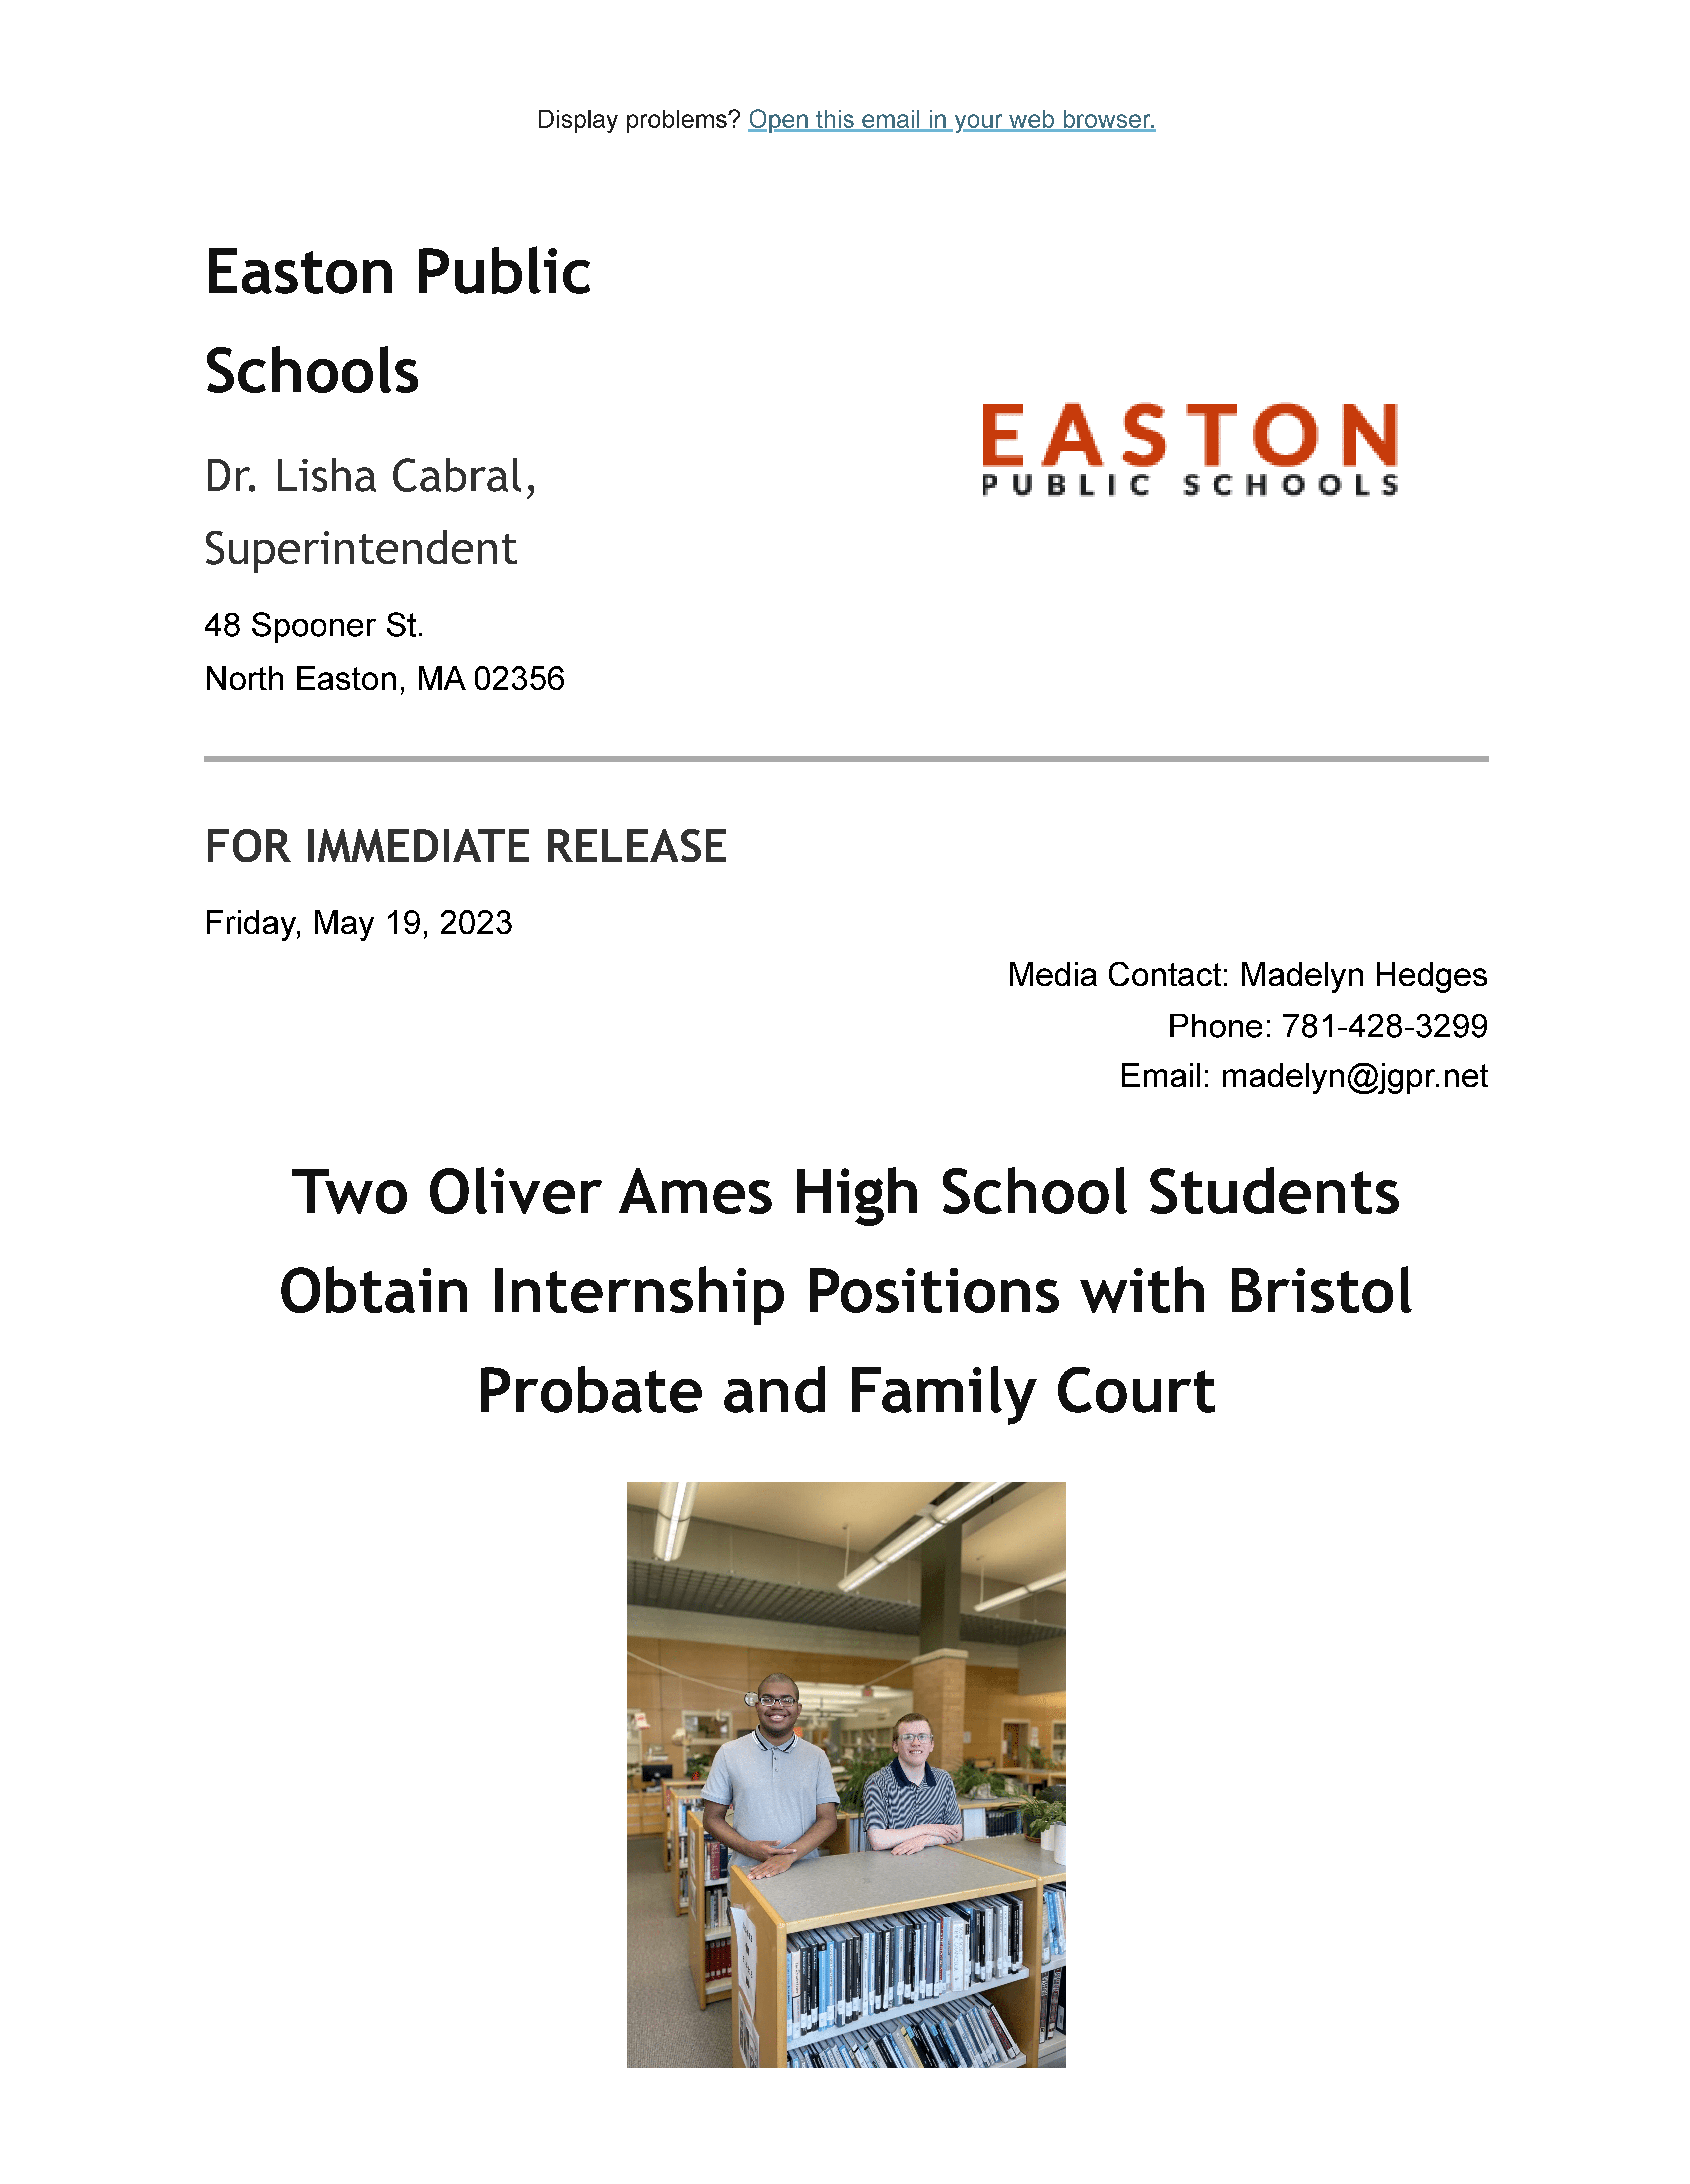 Oliver Ames High School Transition Program students Lukas Soares and Mike Orsinger have obtained internship positions with the Bristol Probate and Family Court through the Autism Higher Education Foundations Paralegal Assistant Training Program. (PhotoCourtesy Easton Public Schools)